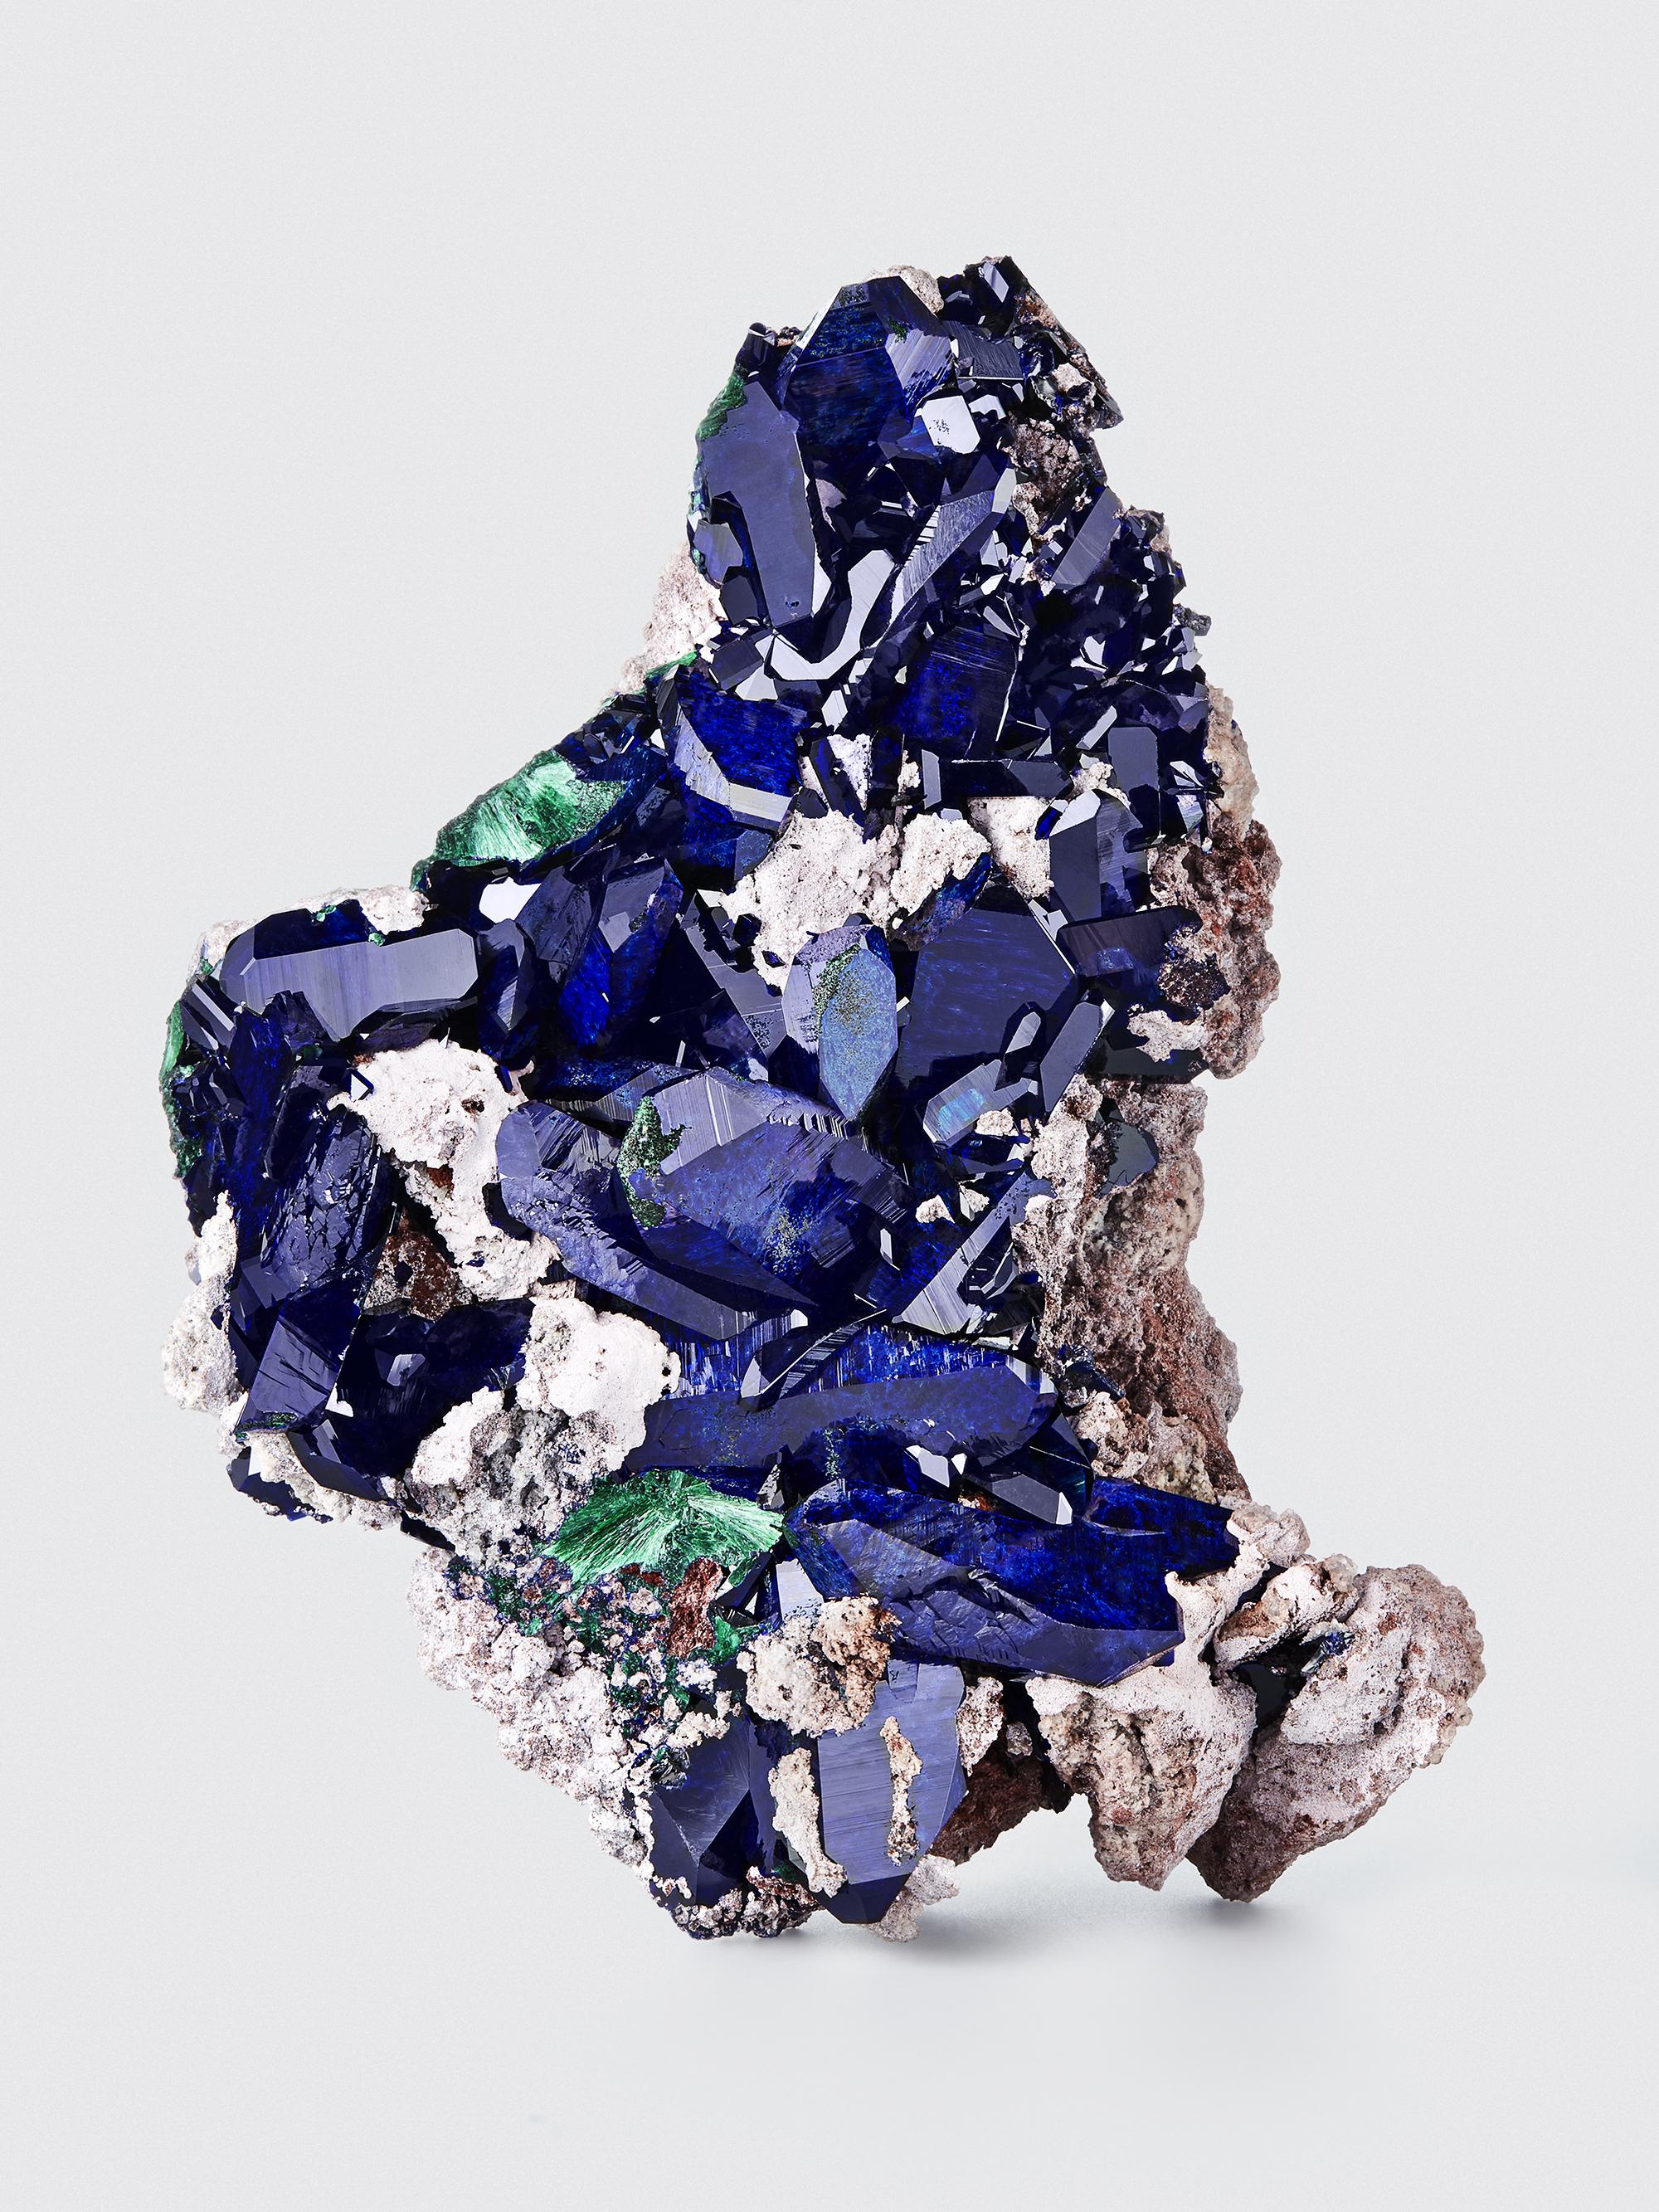 Azurite & Malachite, Milpillas Mine, Mun de Nacozari de Garcia, Sonora, Mexico.

Measures: 14 cm tall x 10.2 cm wide

Azurite of this vibrant electric blue color has only been found a few times in mining history. This specimen exhibits the color